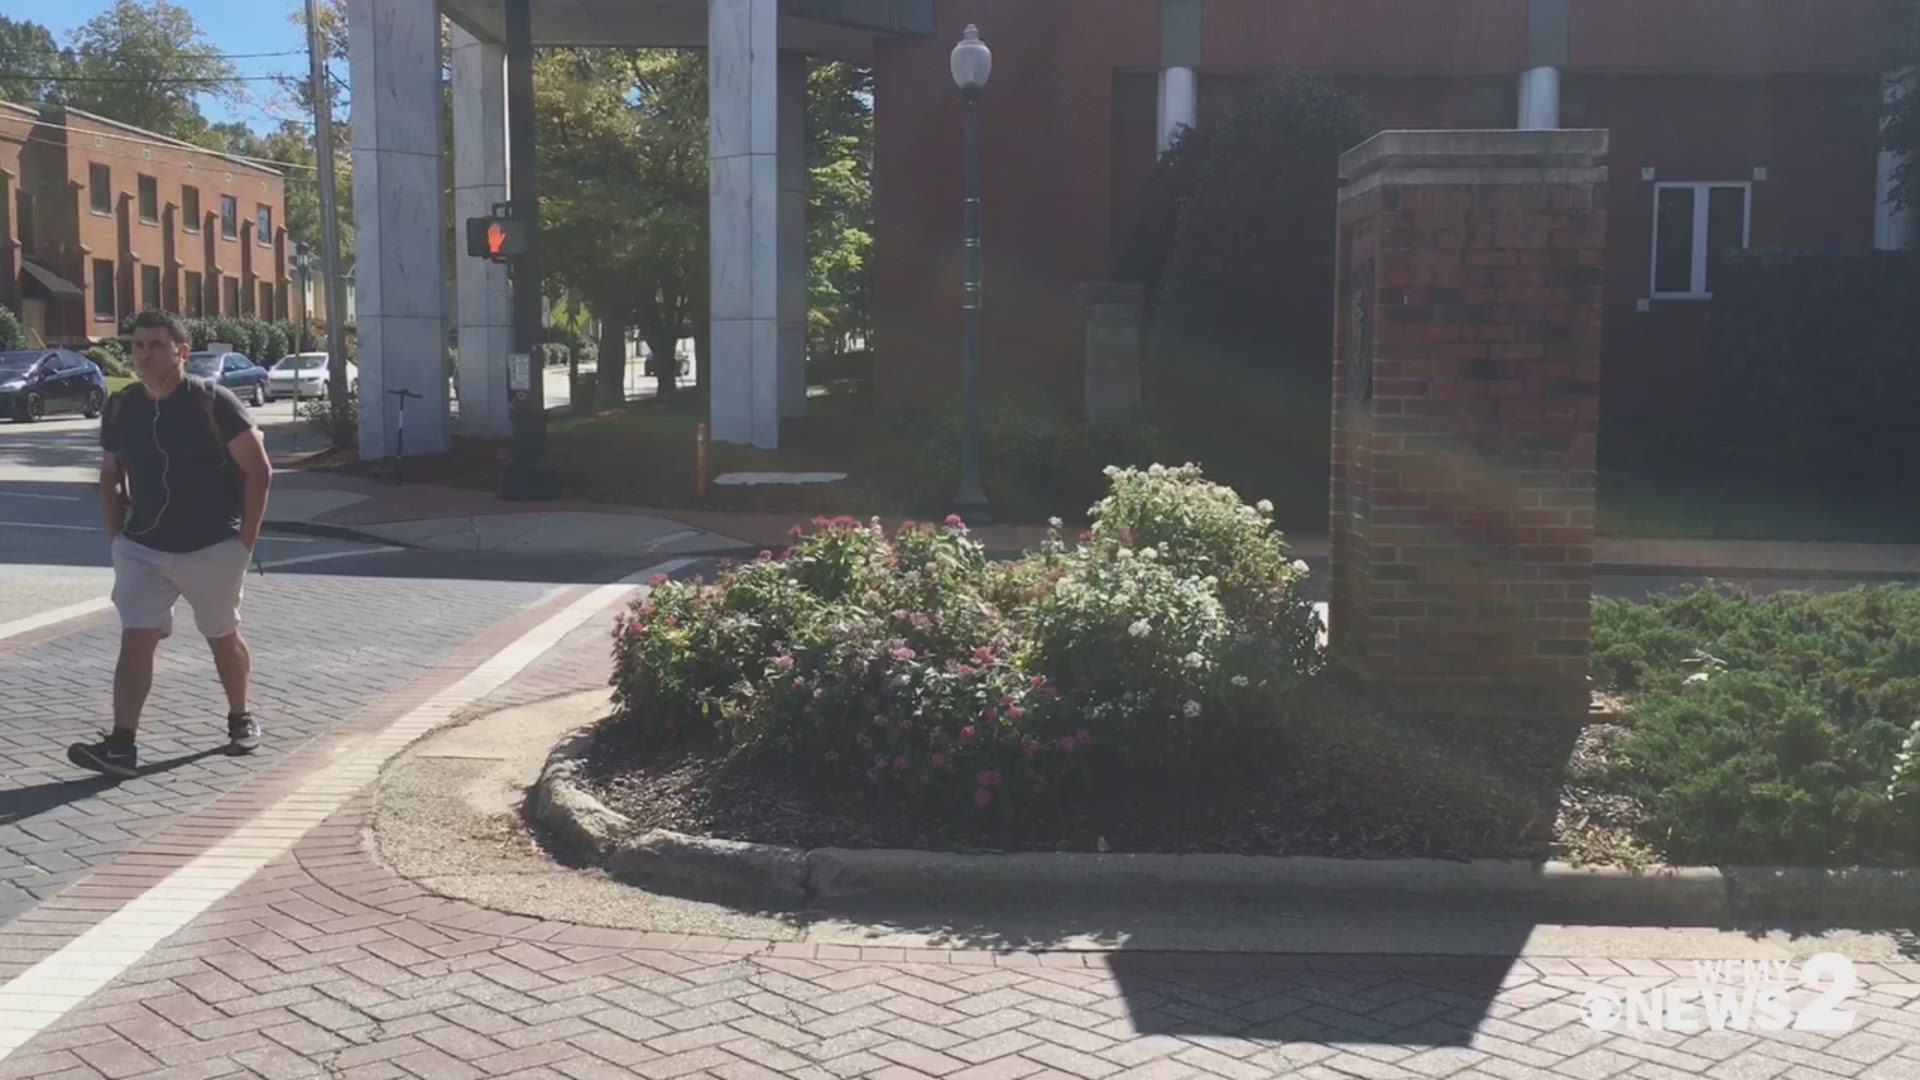 A plaque honoring WFMY News 2's Lee Kinard disappears on the UNCG campus.